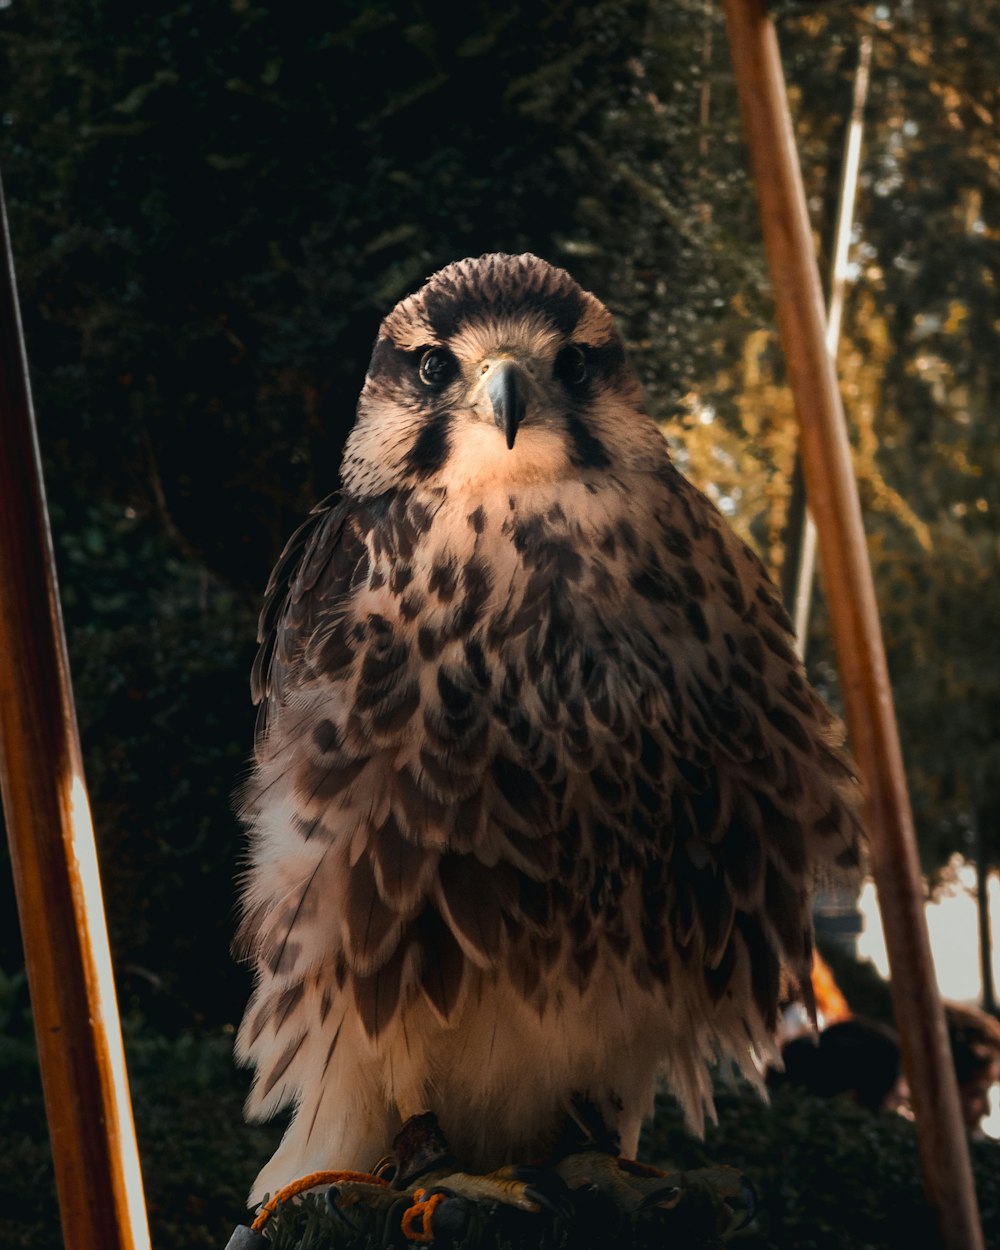 a bird of prey sitting on top of a wooden pole